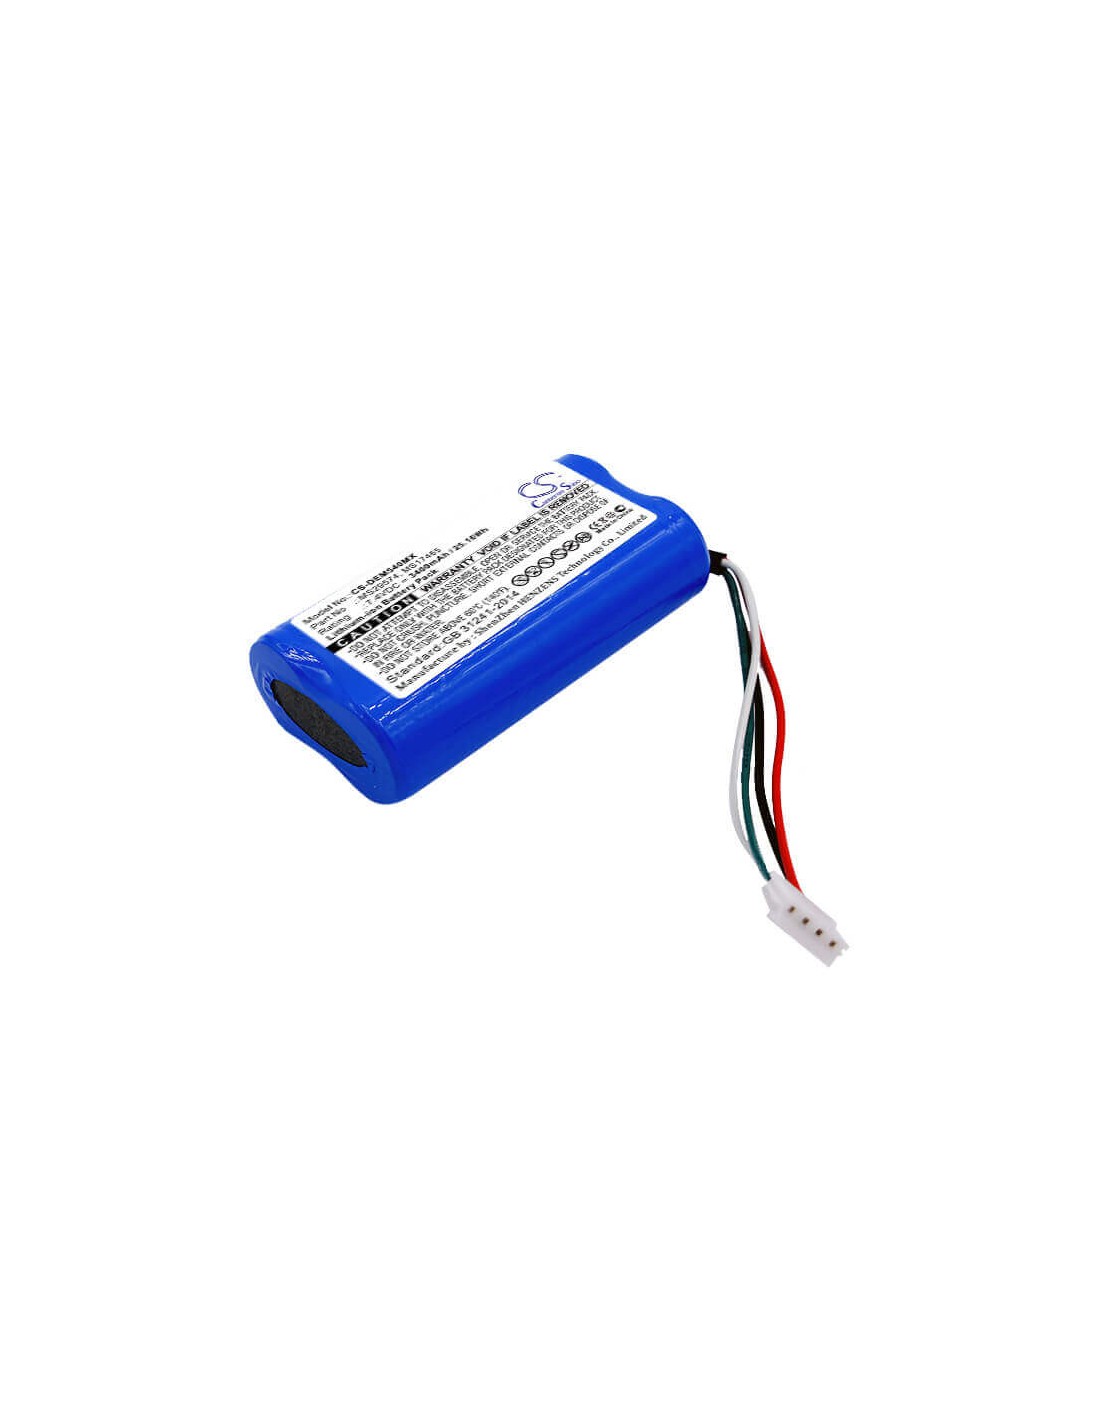 Battery for Draeger, Infinity M540, Infinity M540 Monitor 7.4V, 3400mAh - 0.67Wh